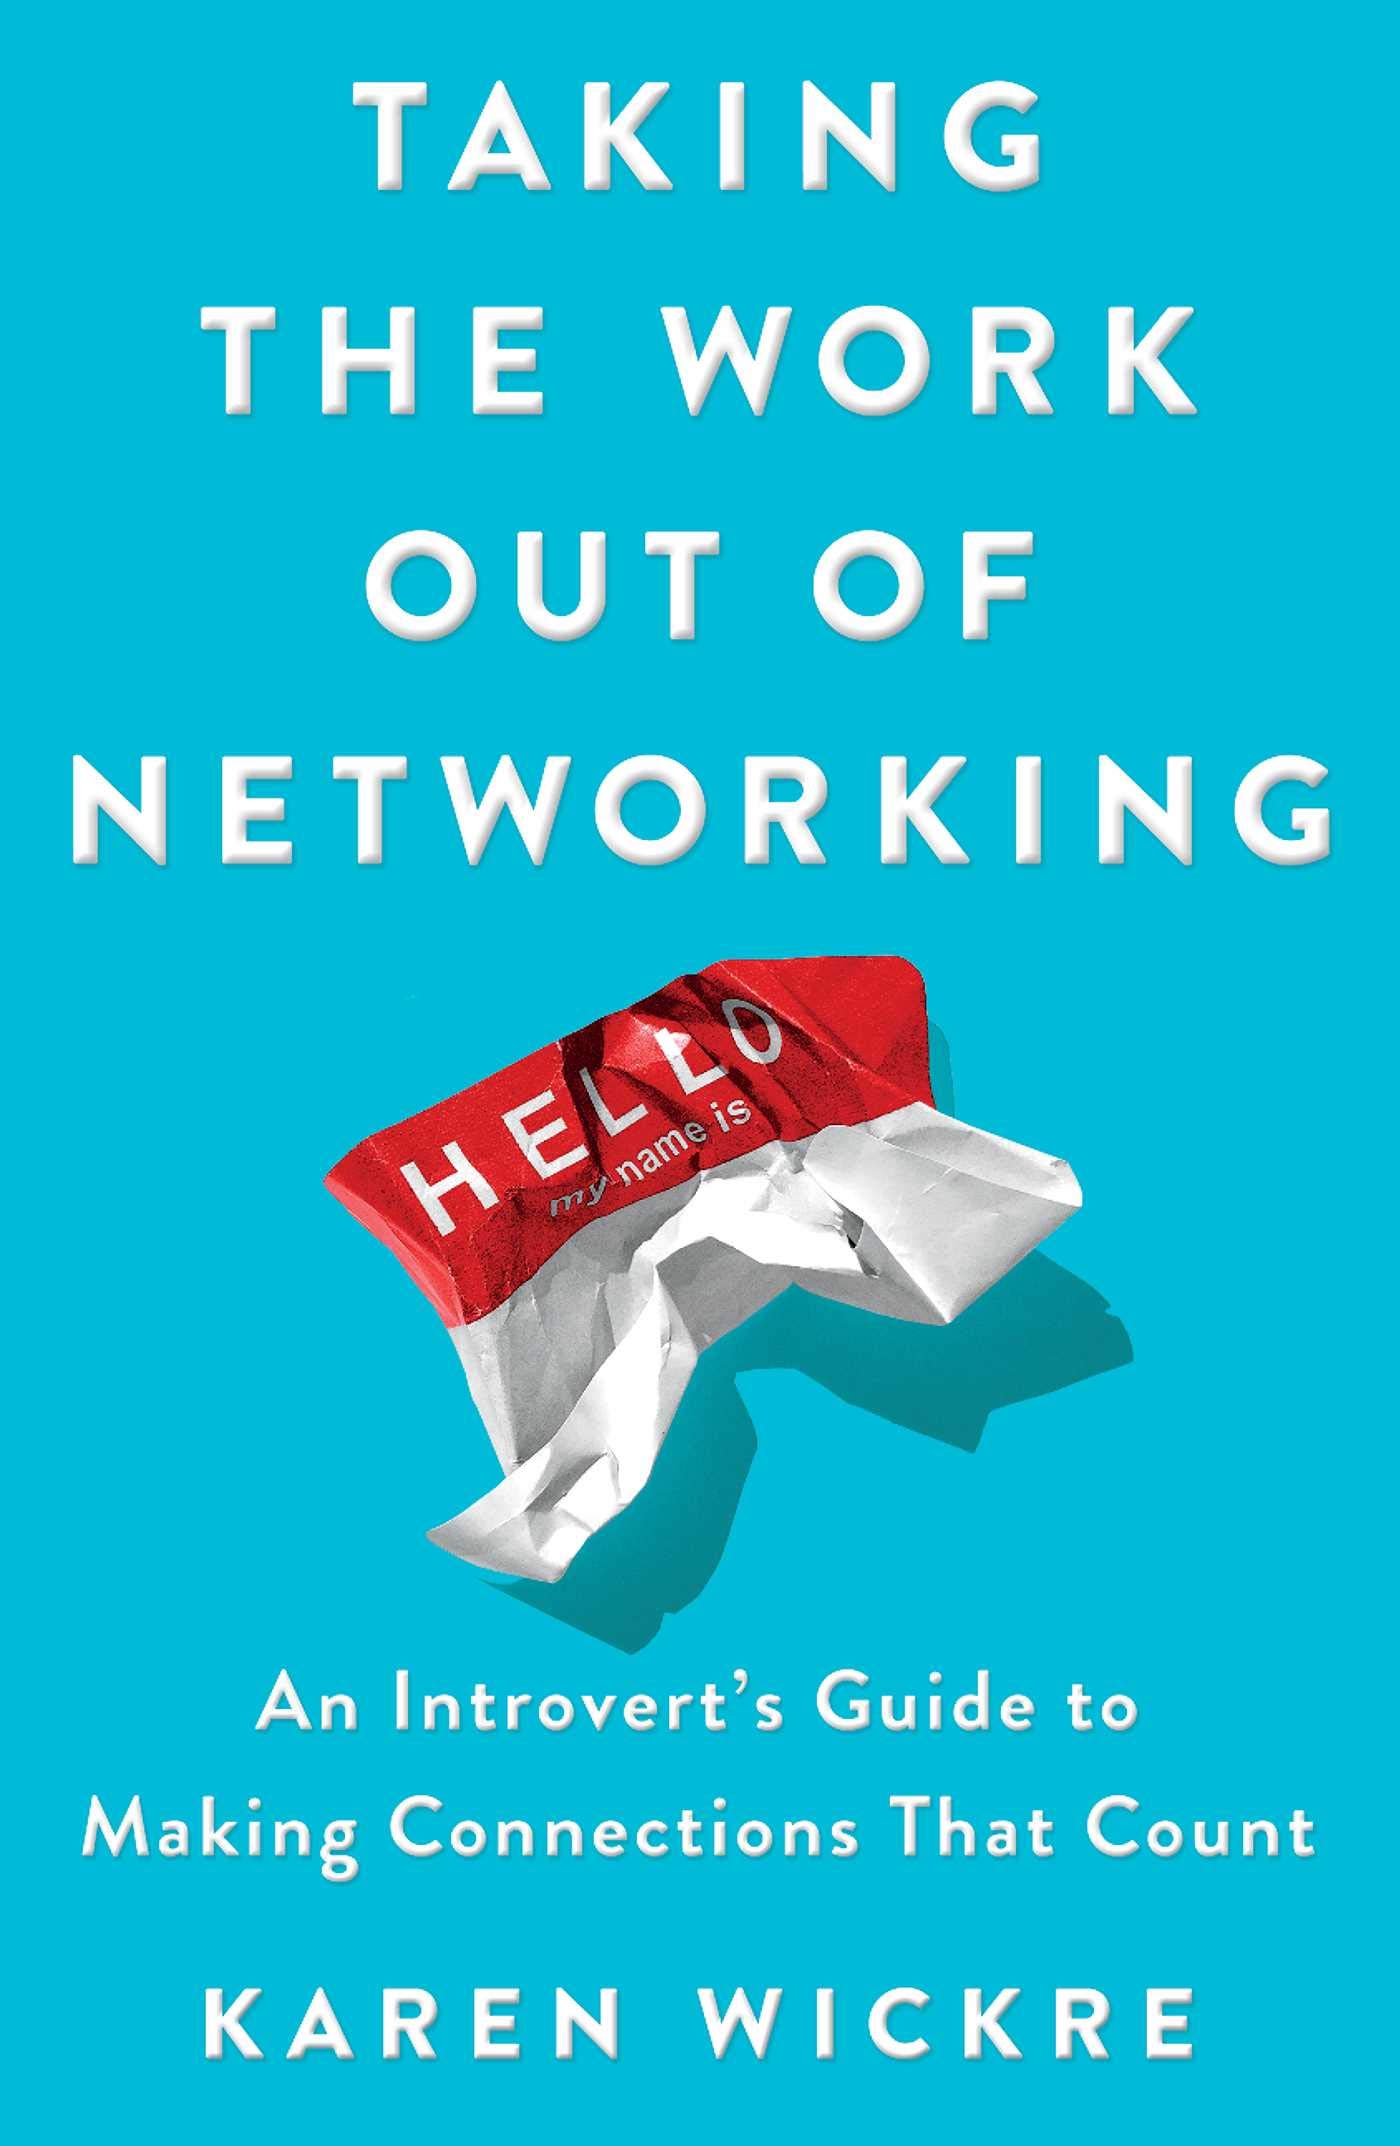 Book cover of Taking the work out of networking by Karen Wickre